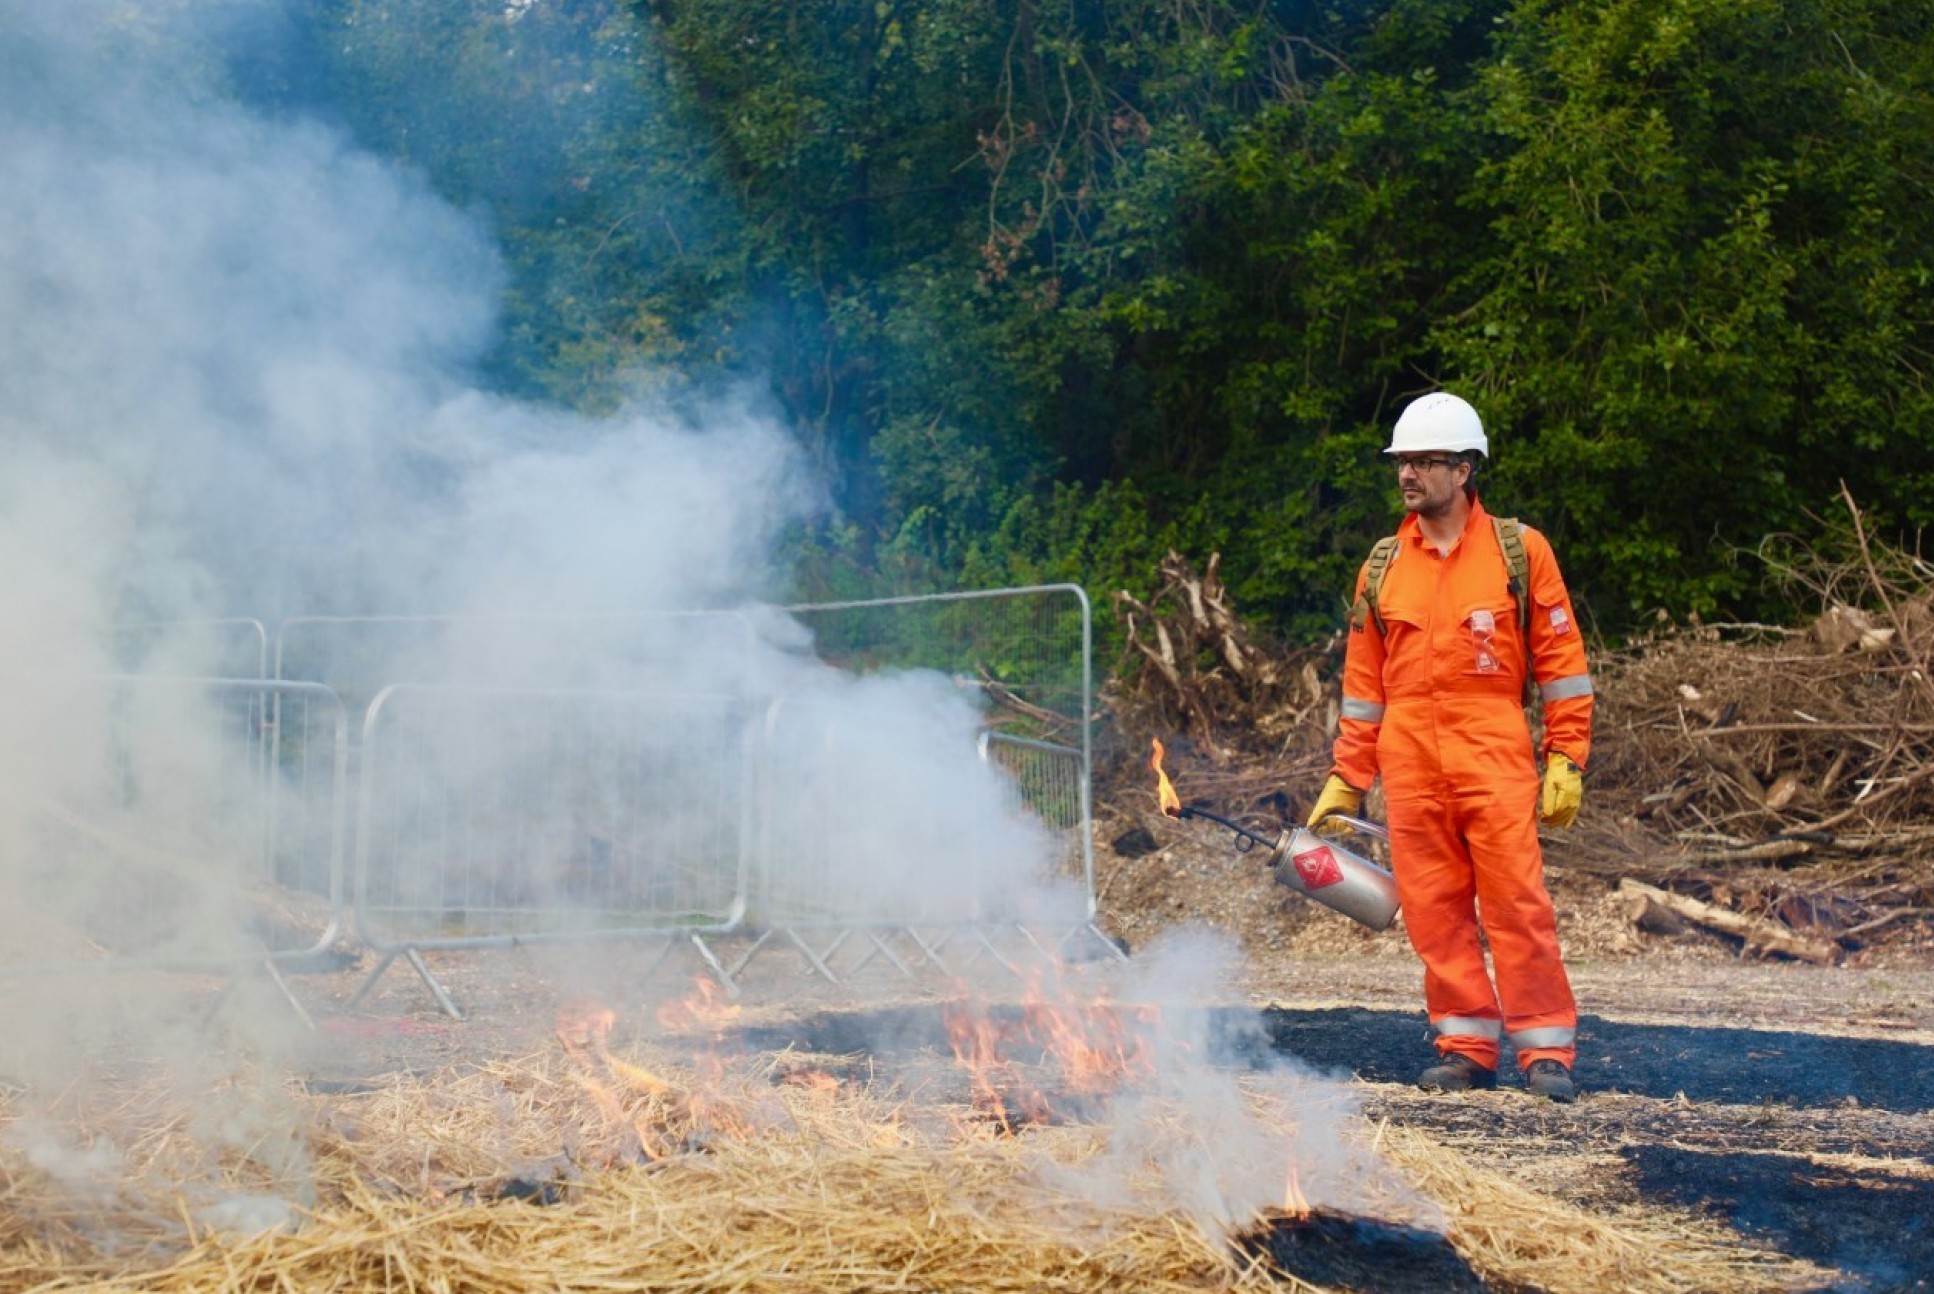 Prof. Rein training with real fire to set up prescribed burning for safety